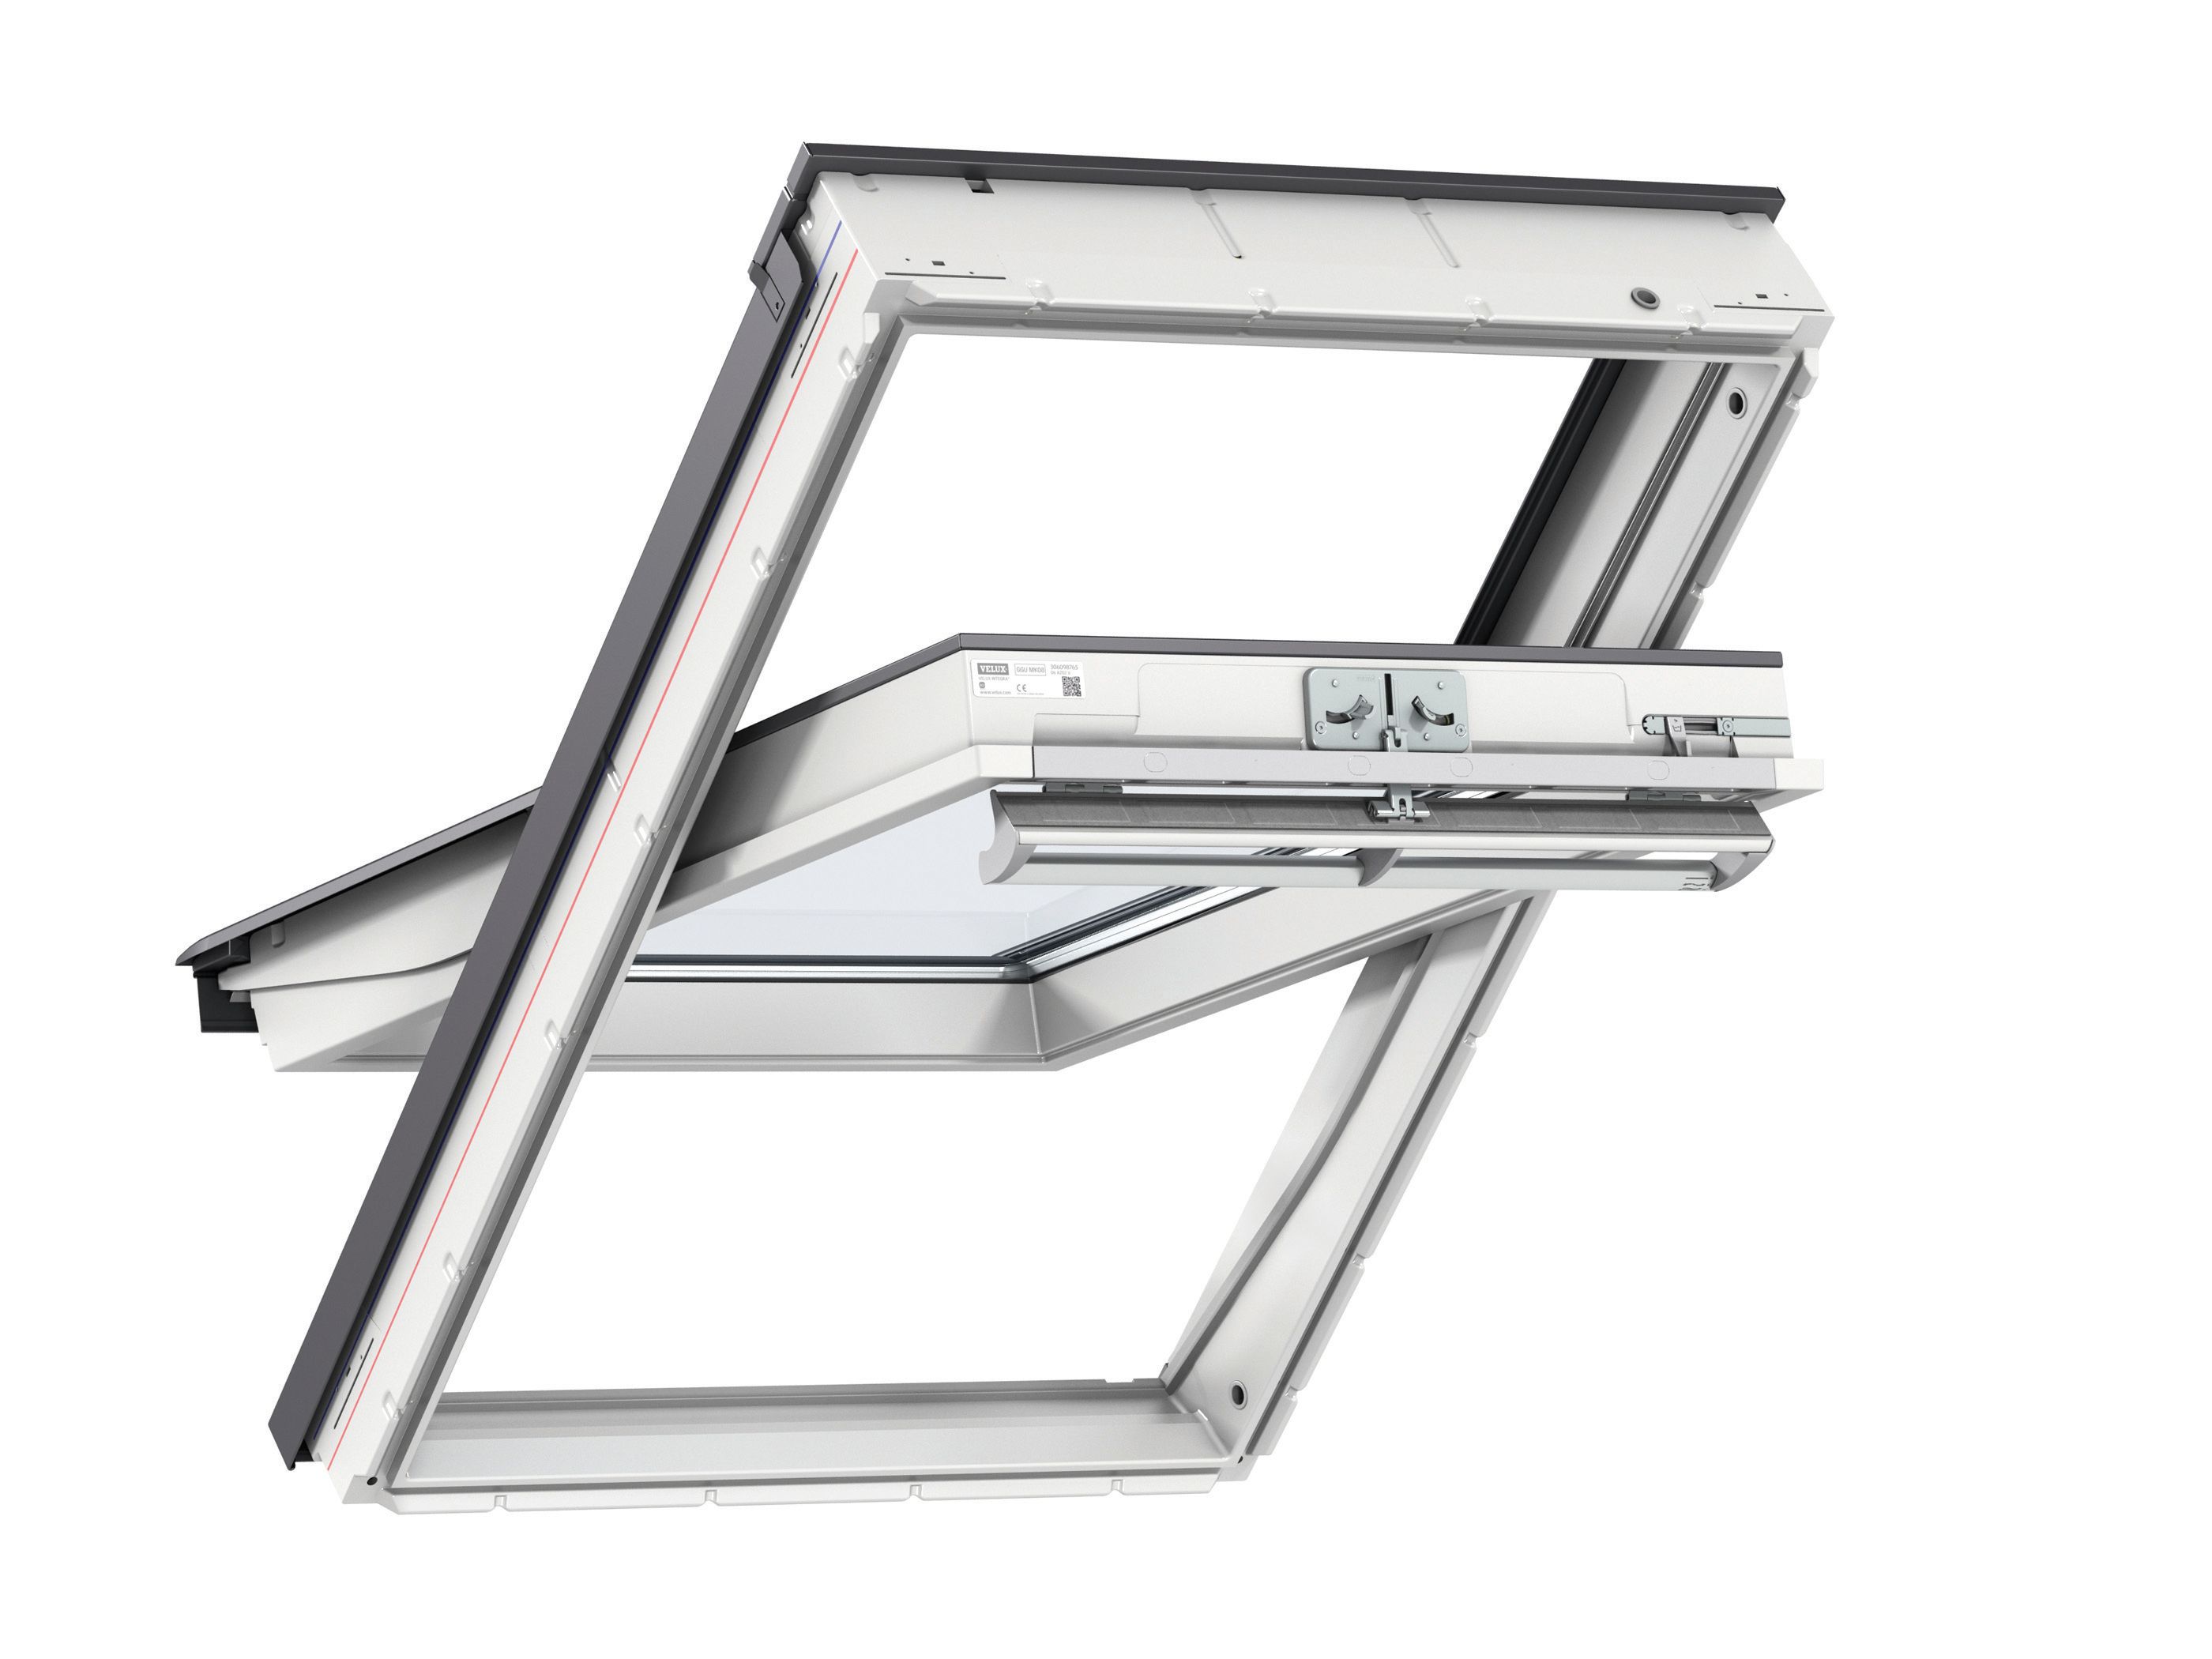 Image of VELUX GGL UK04 2070 White Painted Centre Pivot Roof Window - 1340 x 980mm